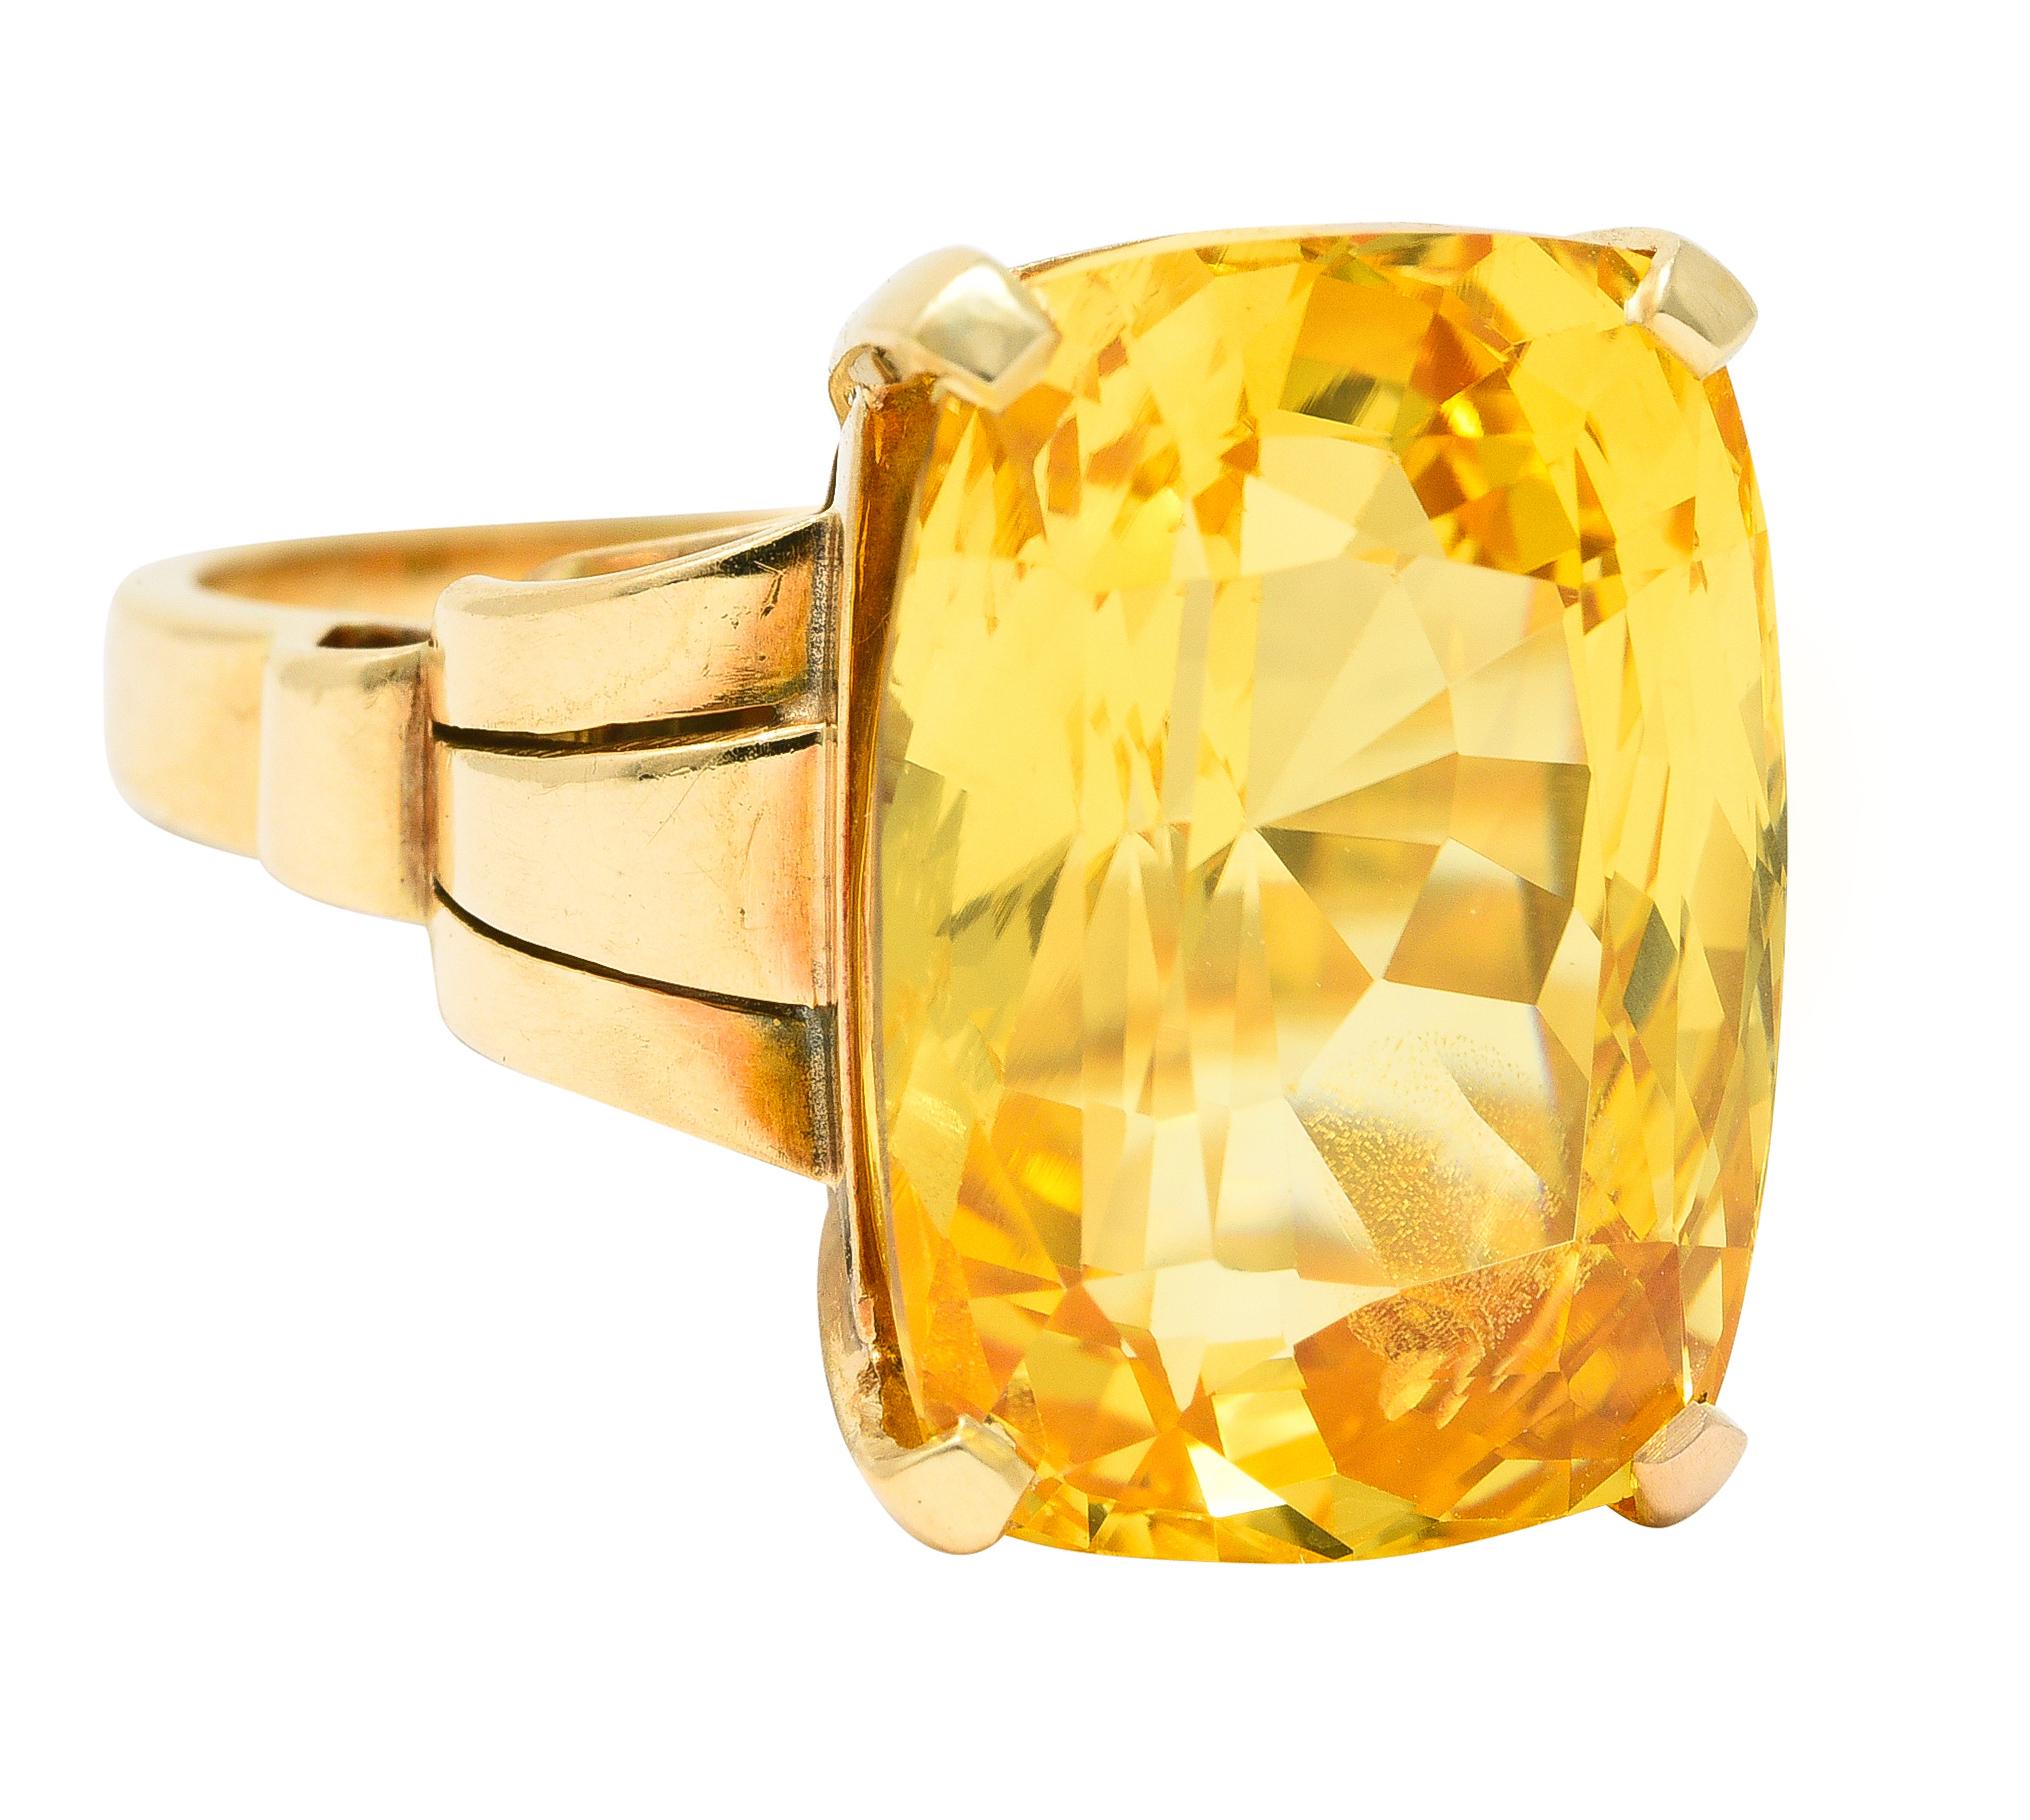 Centering a cushion cut sapphire weighing 17.33 carats total - transparent medium yellow in color. Natural Ceylon in origin with no indications of heat treatment - prong set in basket. Flanked by fanning tri-split cathedral shoulders. Completed by